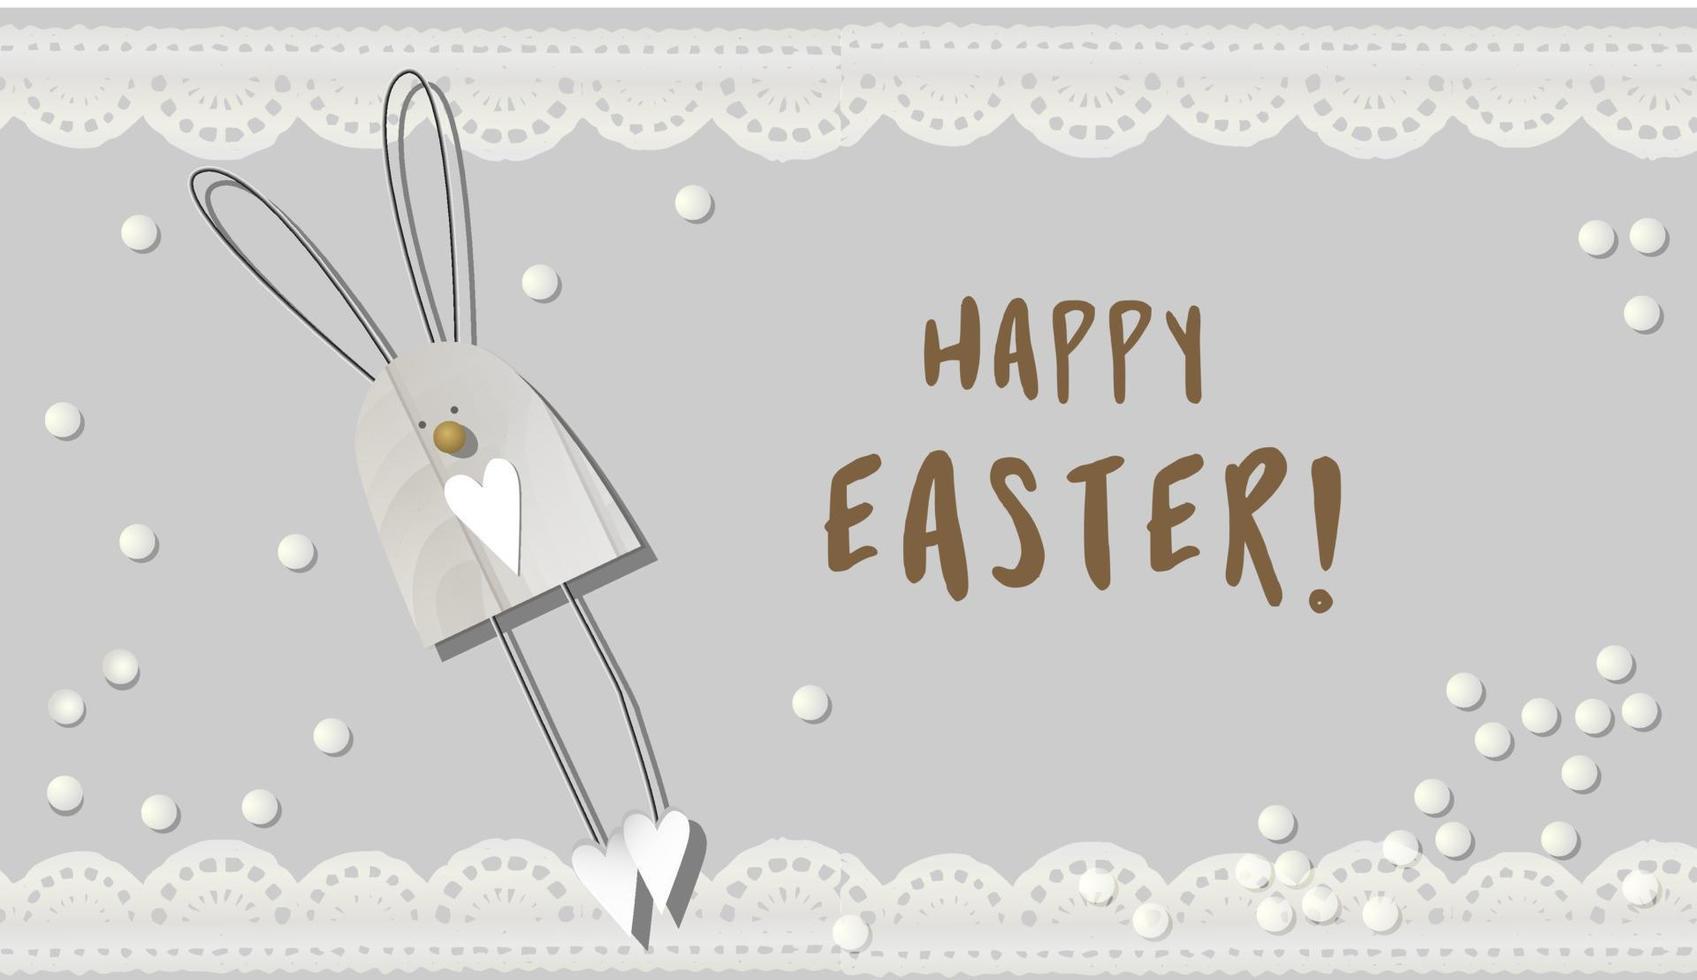 Holiday banner with easter. Easter design white pearl beads, lace ribbon, wooden toy hare or rabbit. Wooden light background. flat lay, top view. Horizontal holiday poster, website header.. vector